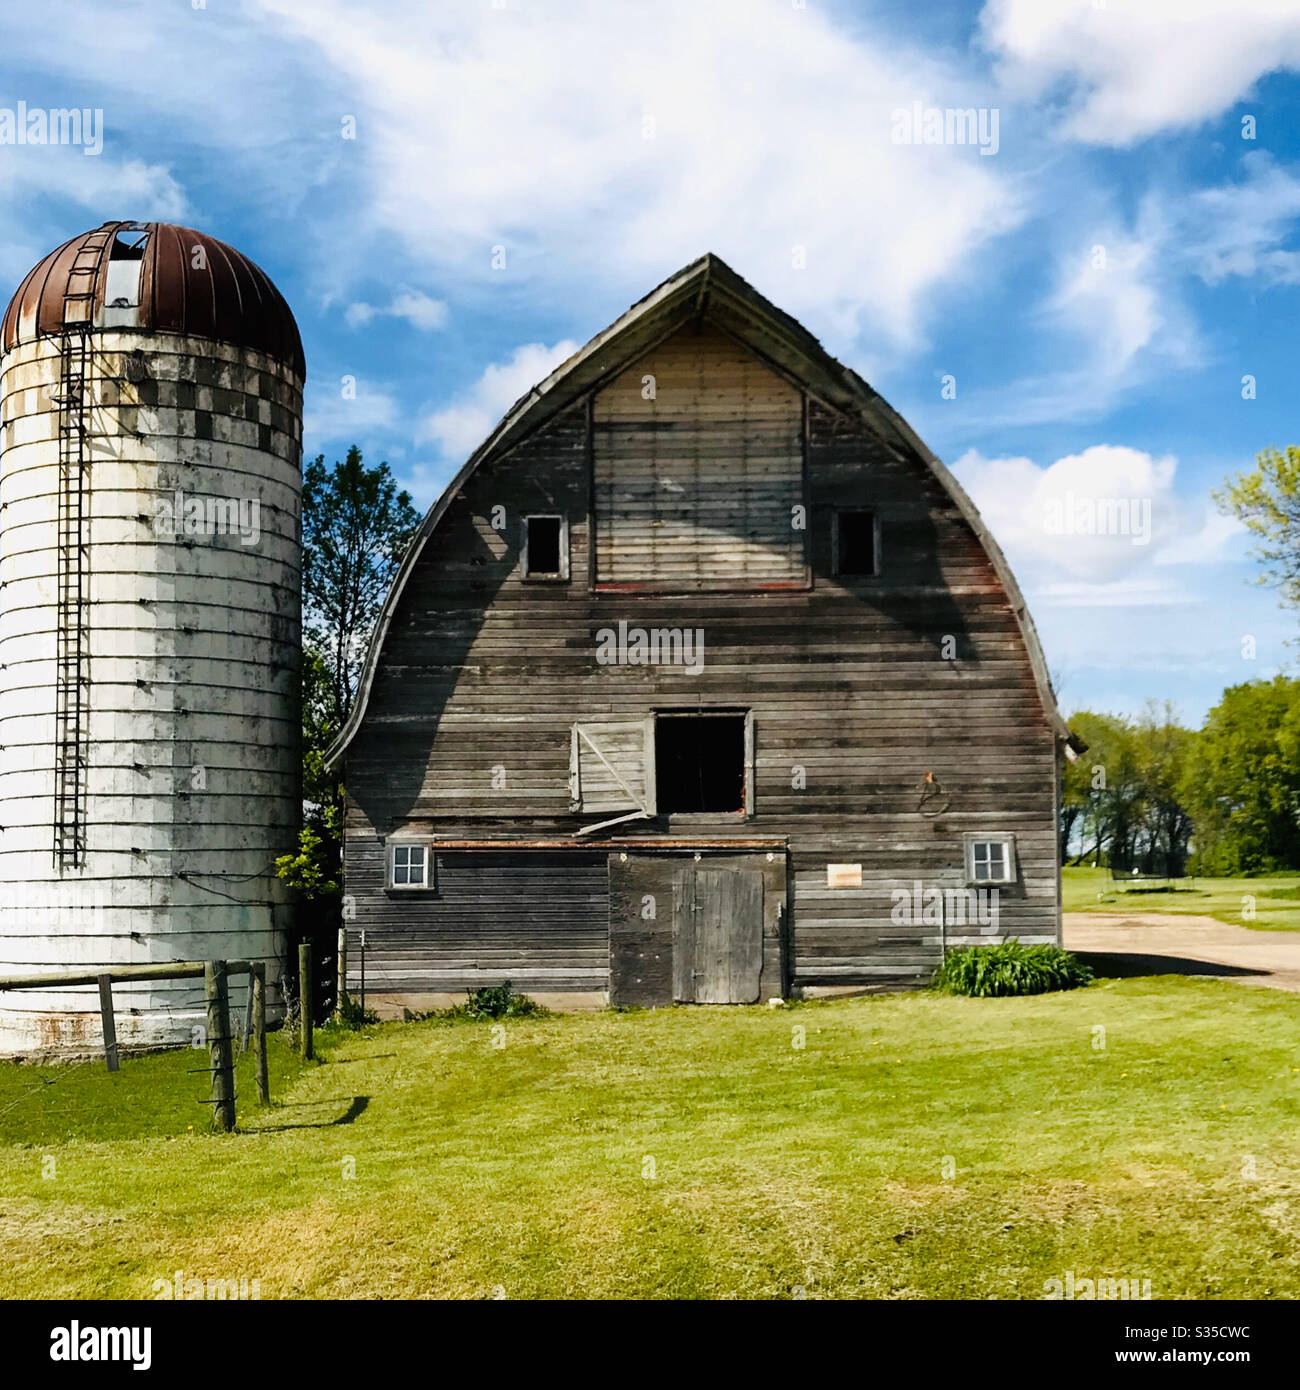 Old wooden barn and silo Stock Photo